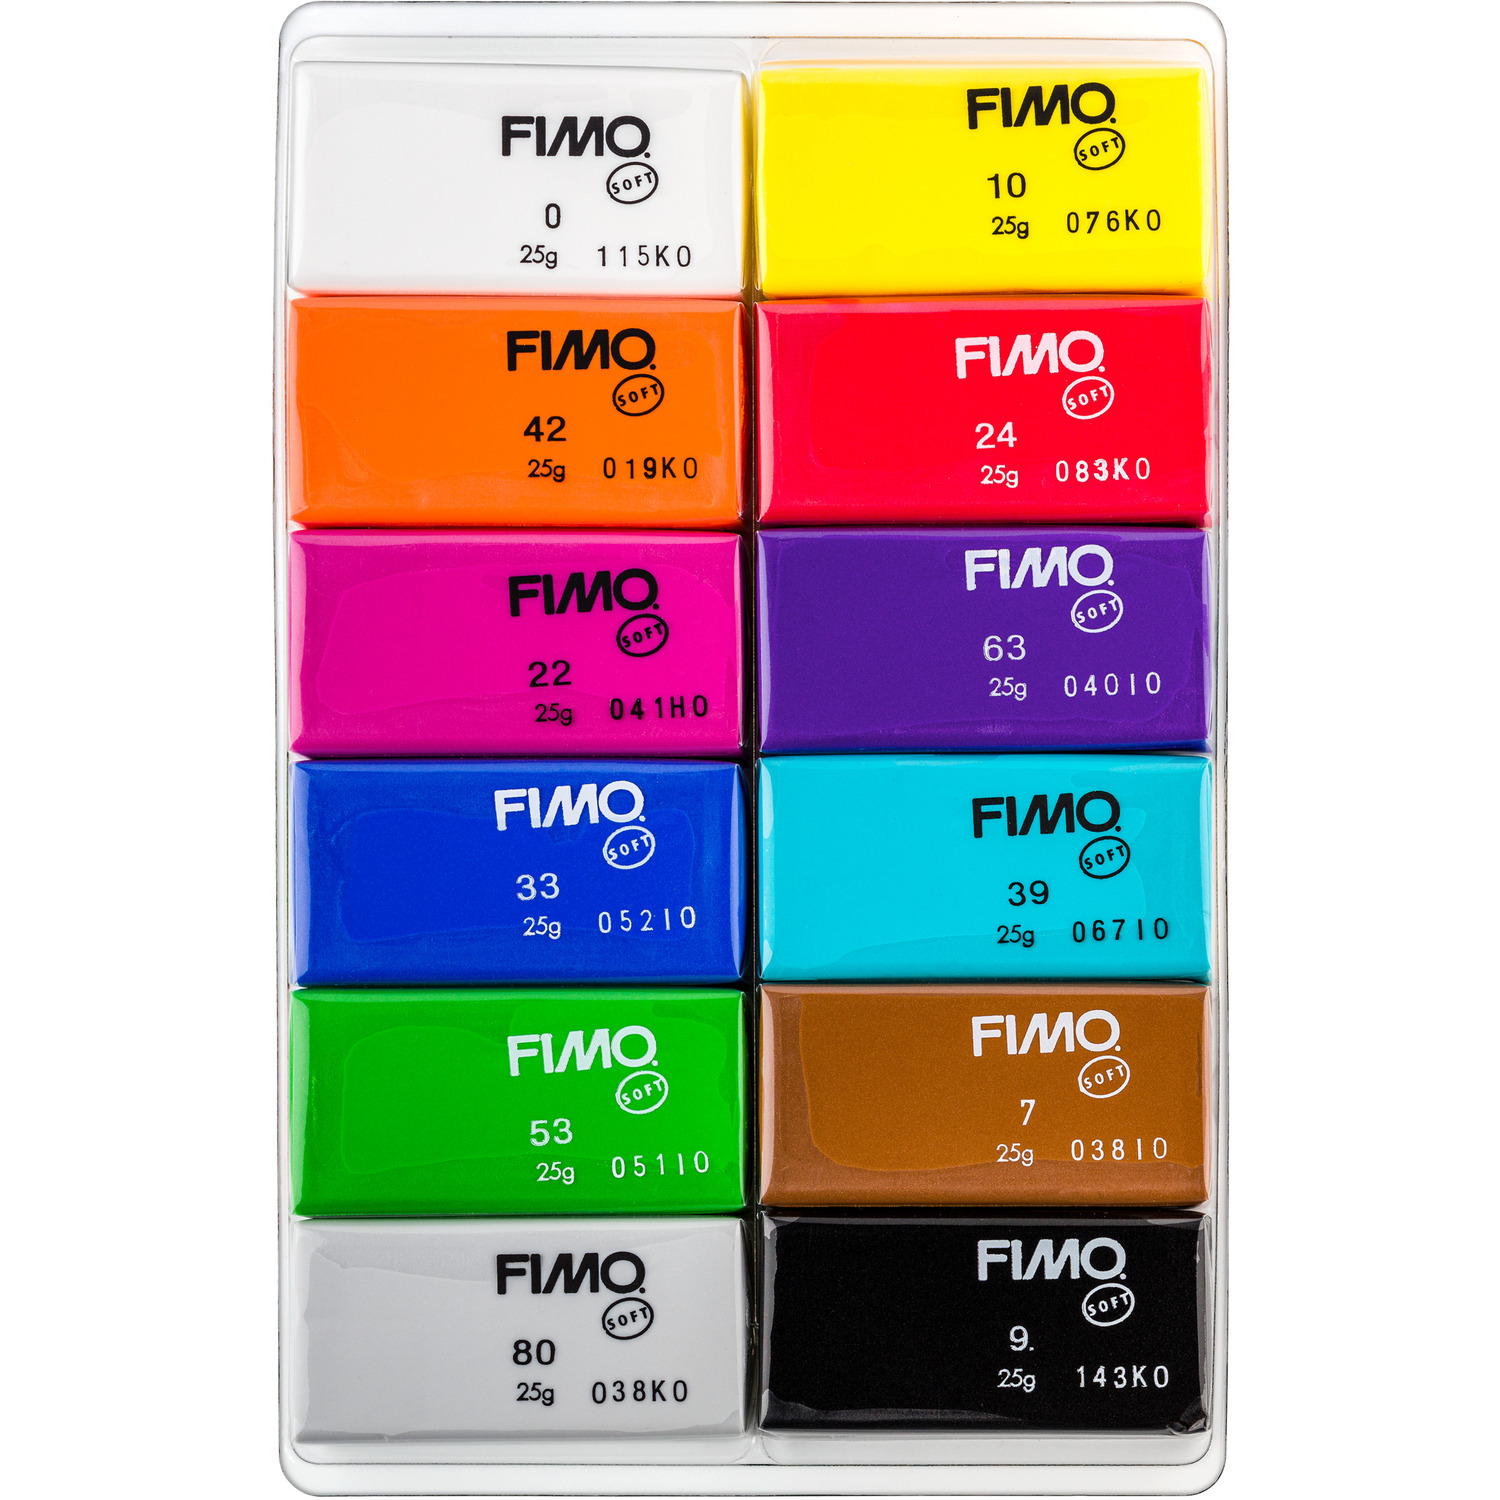 Staedtler Fimo Soft Modelling Clay Basic Colours 12 Pack Image 2